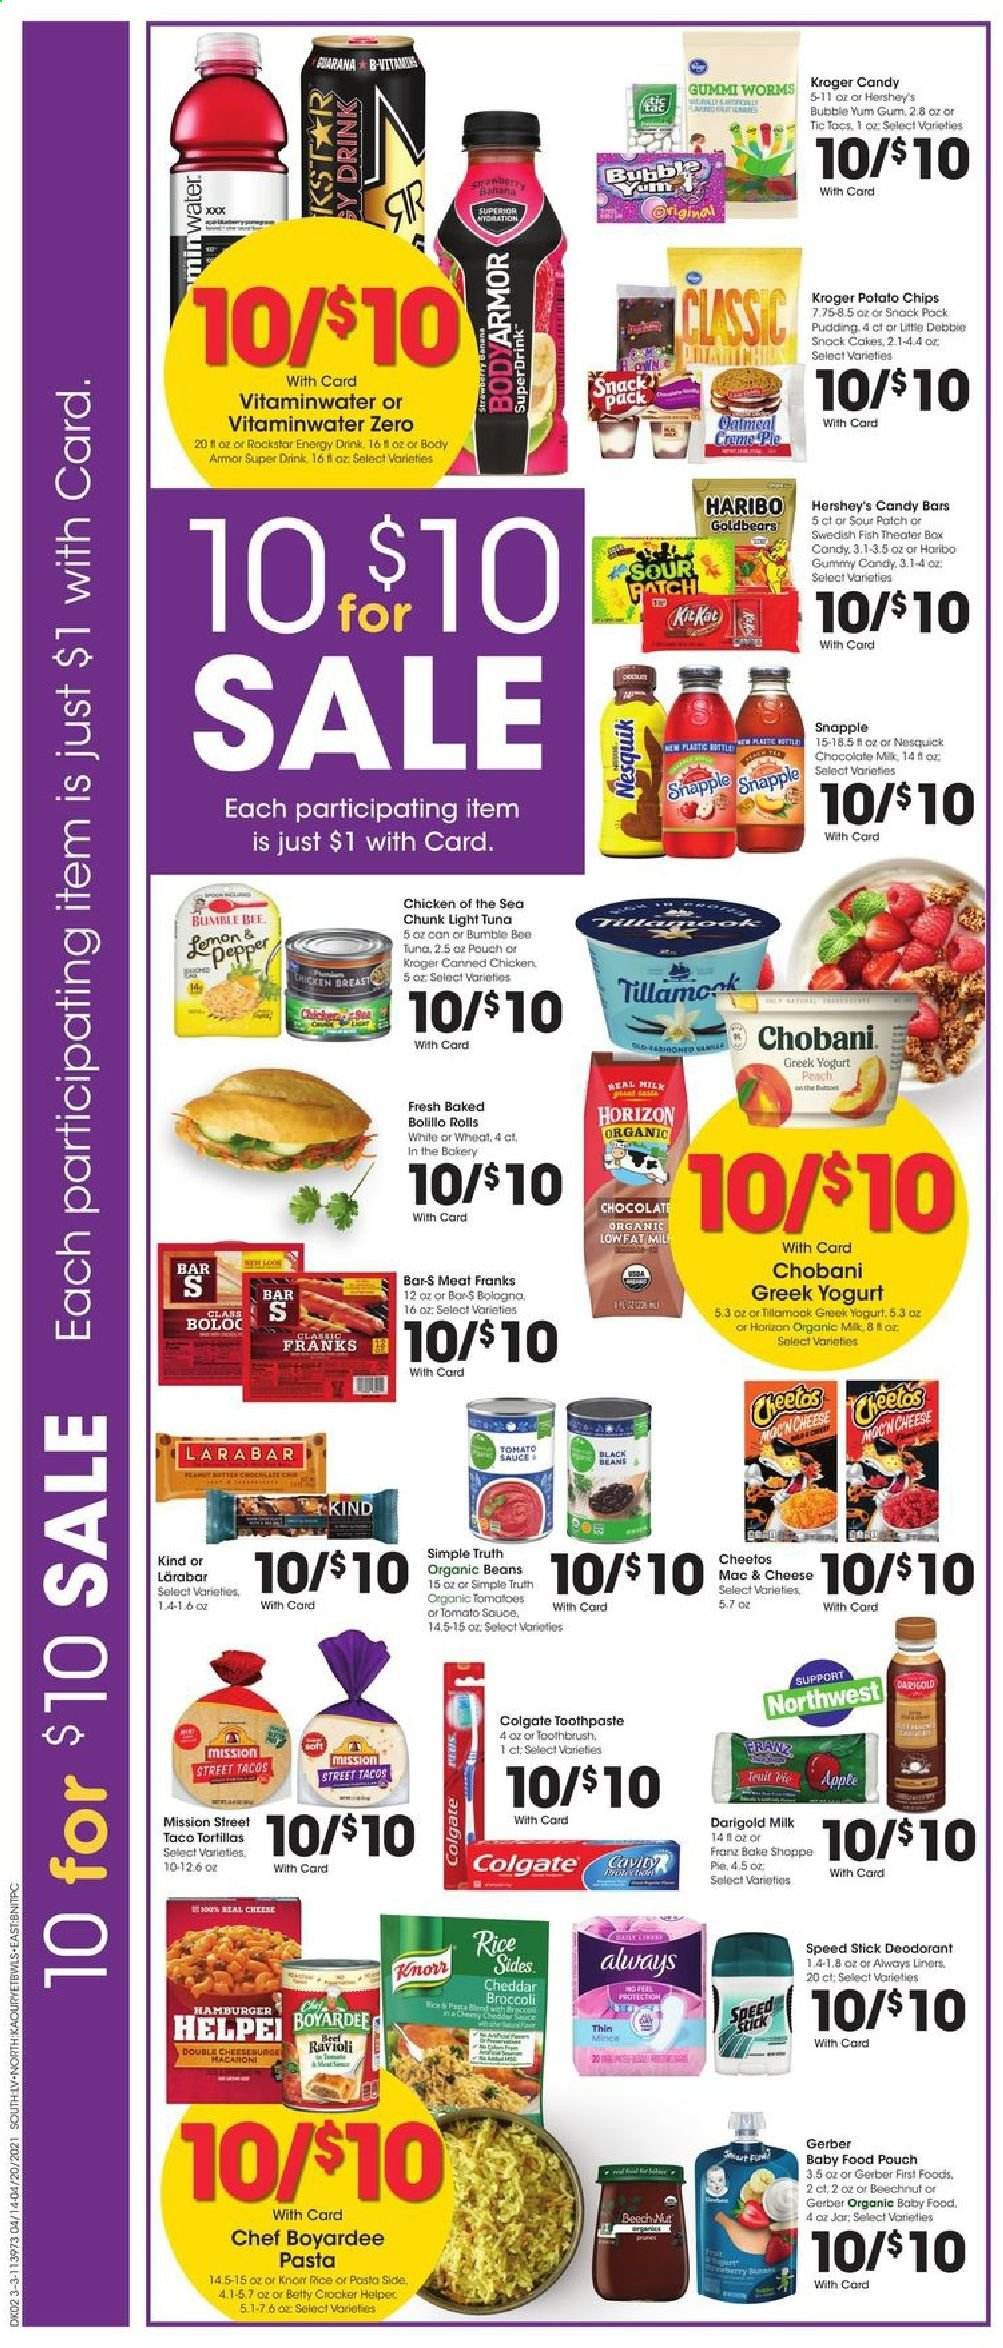 thumbnail - Fred Meyer Flyer - 04/14/2021 - 04/20/2021 - Sales products - tortillas, cake, pie, tacos, beans, tomatoes, macaroni & cheese, ravioli, macaroni, hamburger, Bumble Bee, Knorr, sauce, bologna sausage, greek yoghurt, pudding, Nesquik, Chobani, milk, Hershey's, chocolate, Haribo, Sour Patch, Gerber, potato chips, Cheetos, chips, oatmeal, light tuna, Chicken of the Sea, Chef Boyardee, pasta, energy drink, Snapple, Rockstar, baby food pouch, organic baby food, Colgate, toothpaste, anti-perspirant, Speed Stick, deodorant, jar, Body Armor. Page 7.